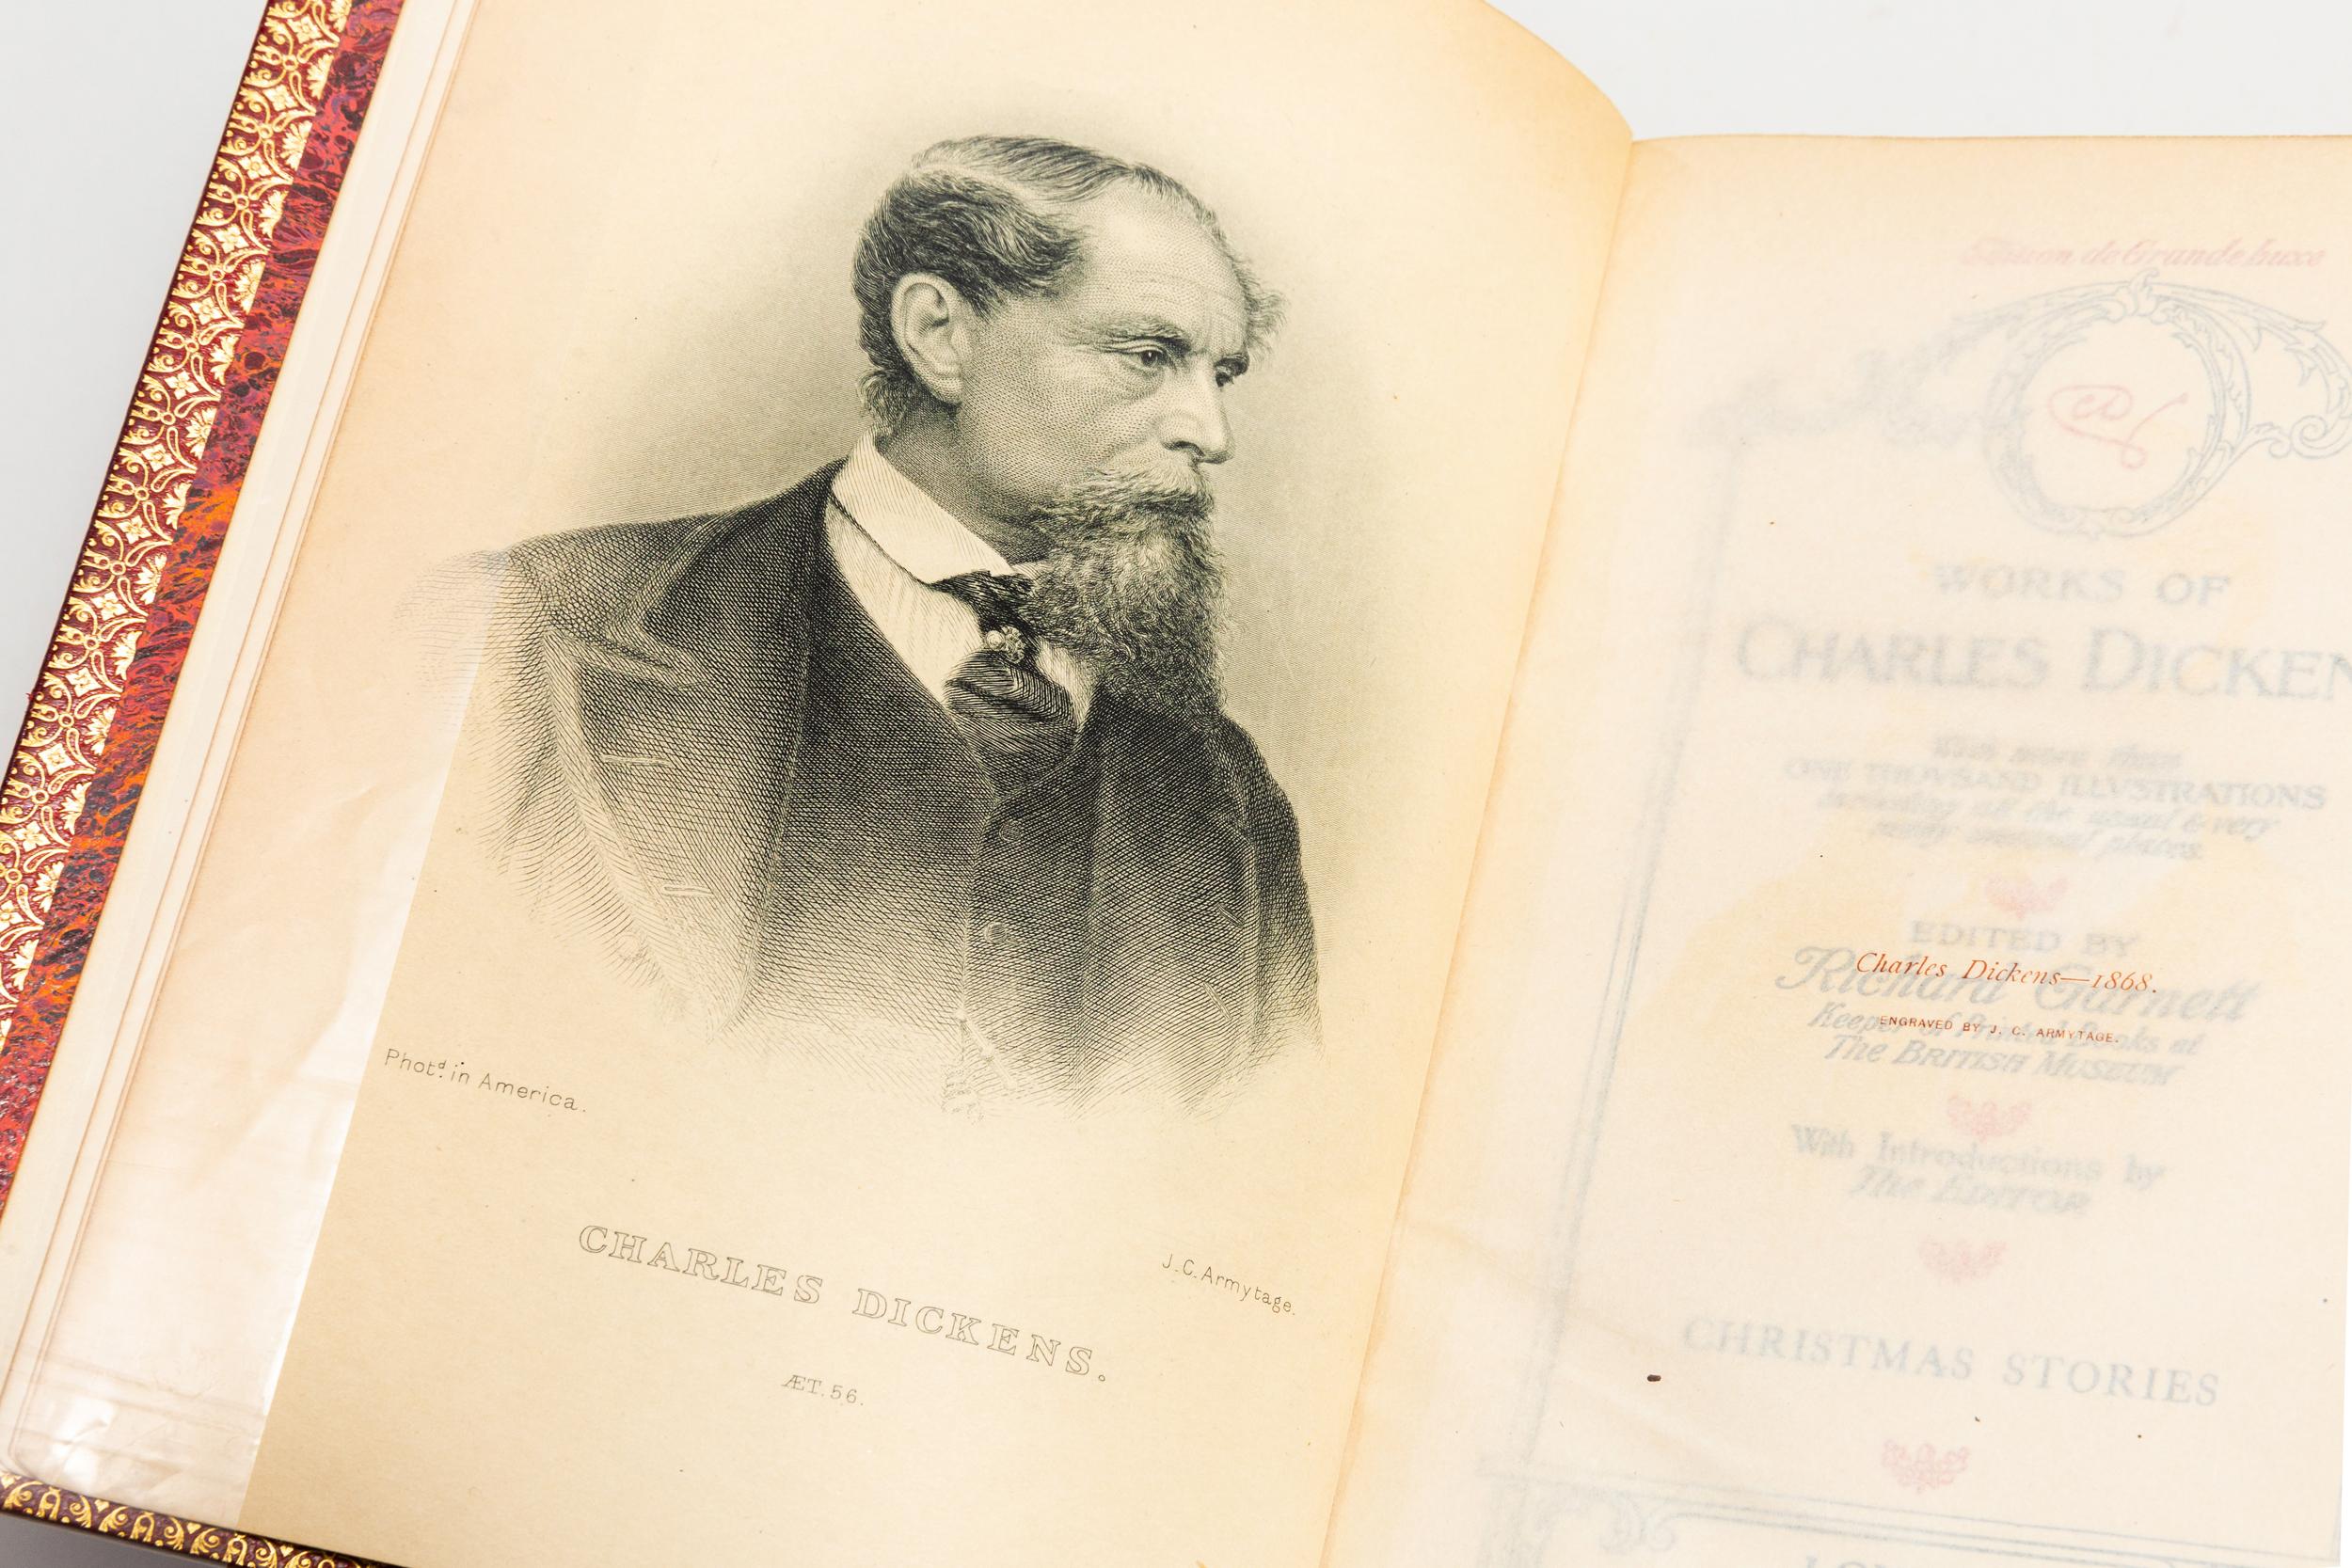 32 Volumes. Charles Dickens, The Works of Charles Dickens 5